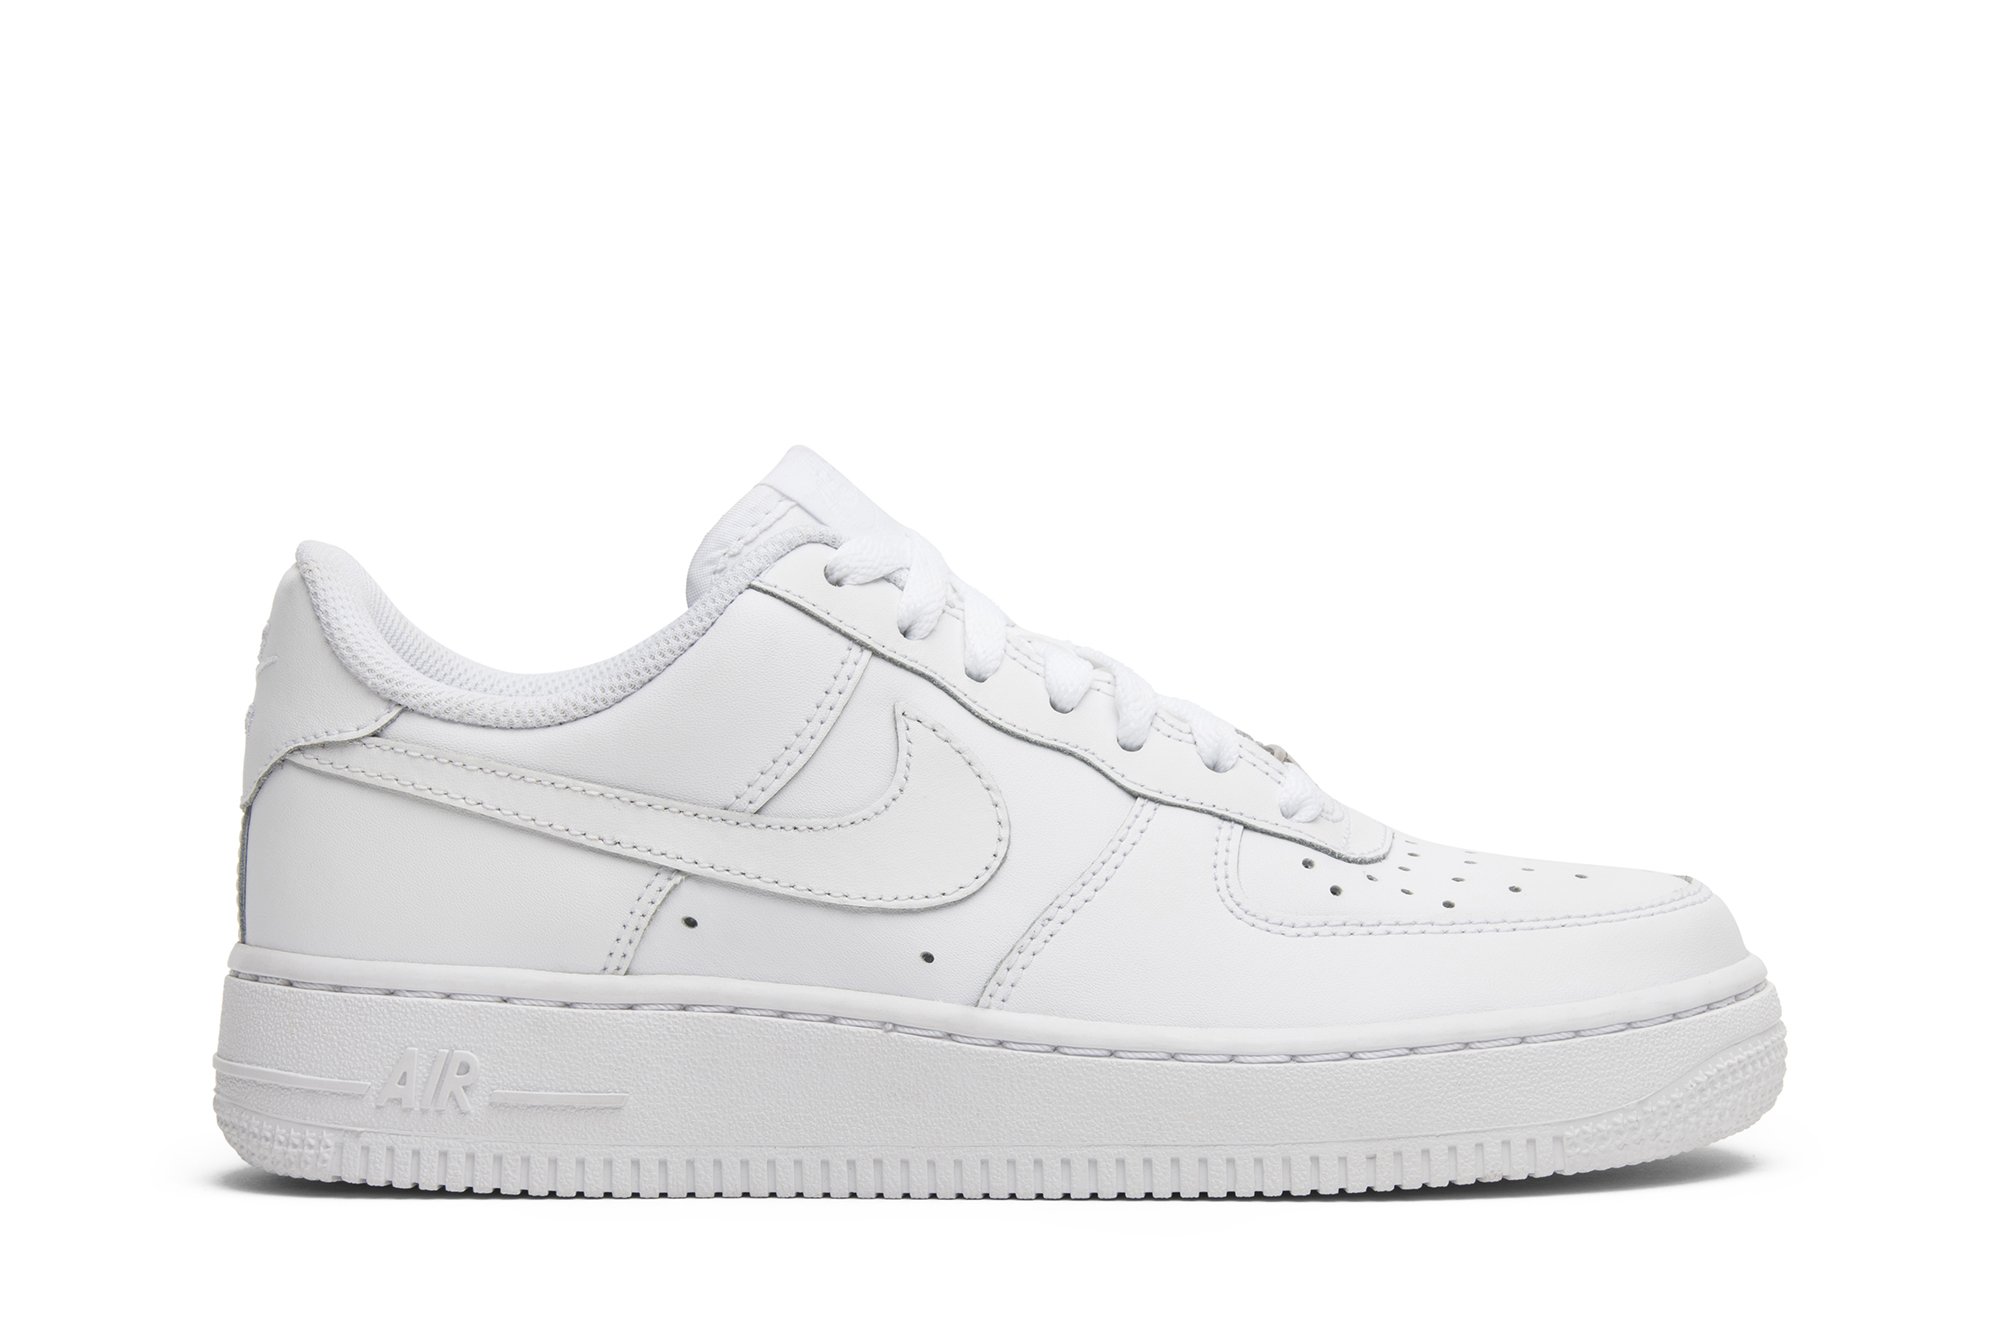 NIKE AIR FORCE 1 LOW GS WHITE 23.5cm